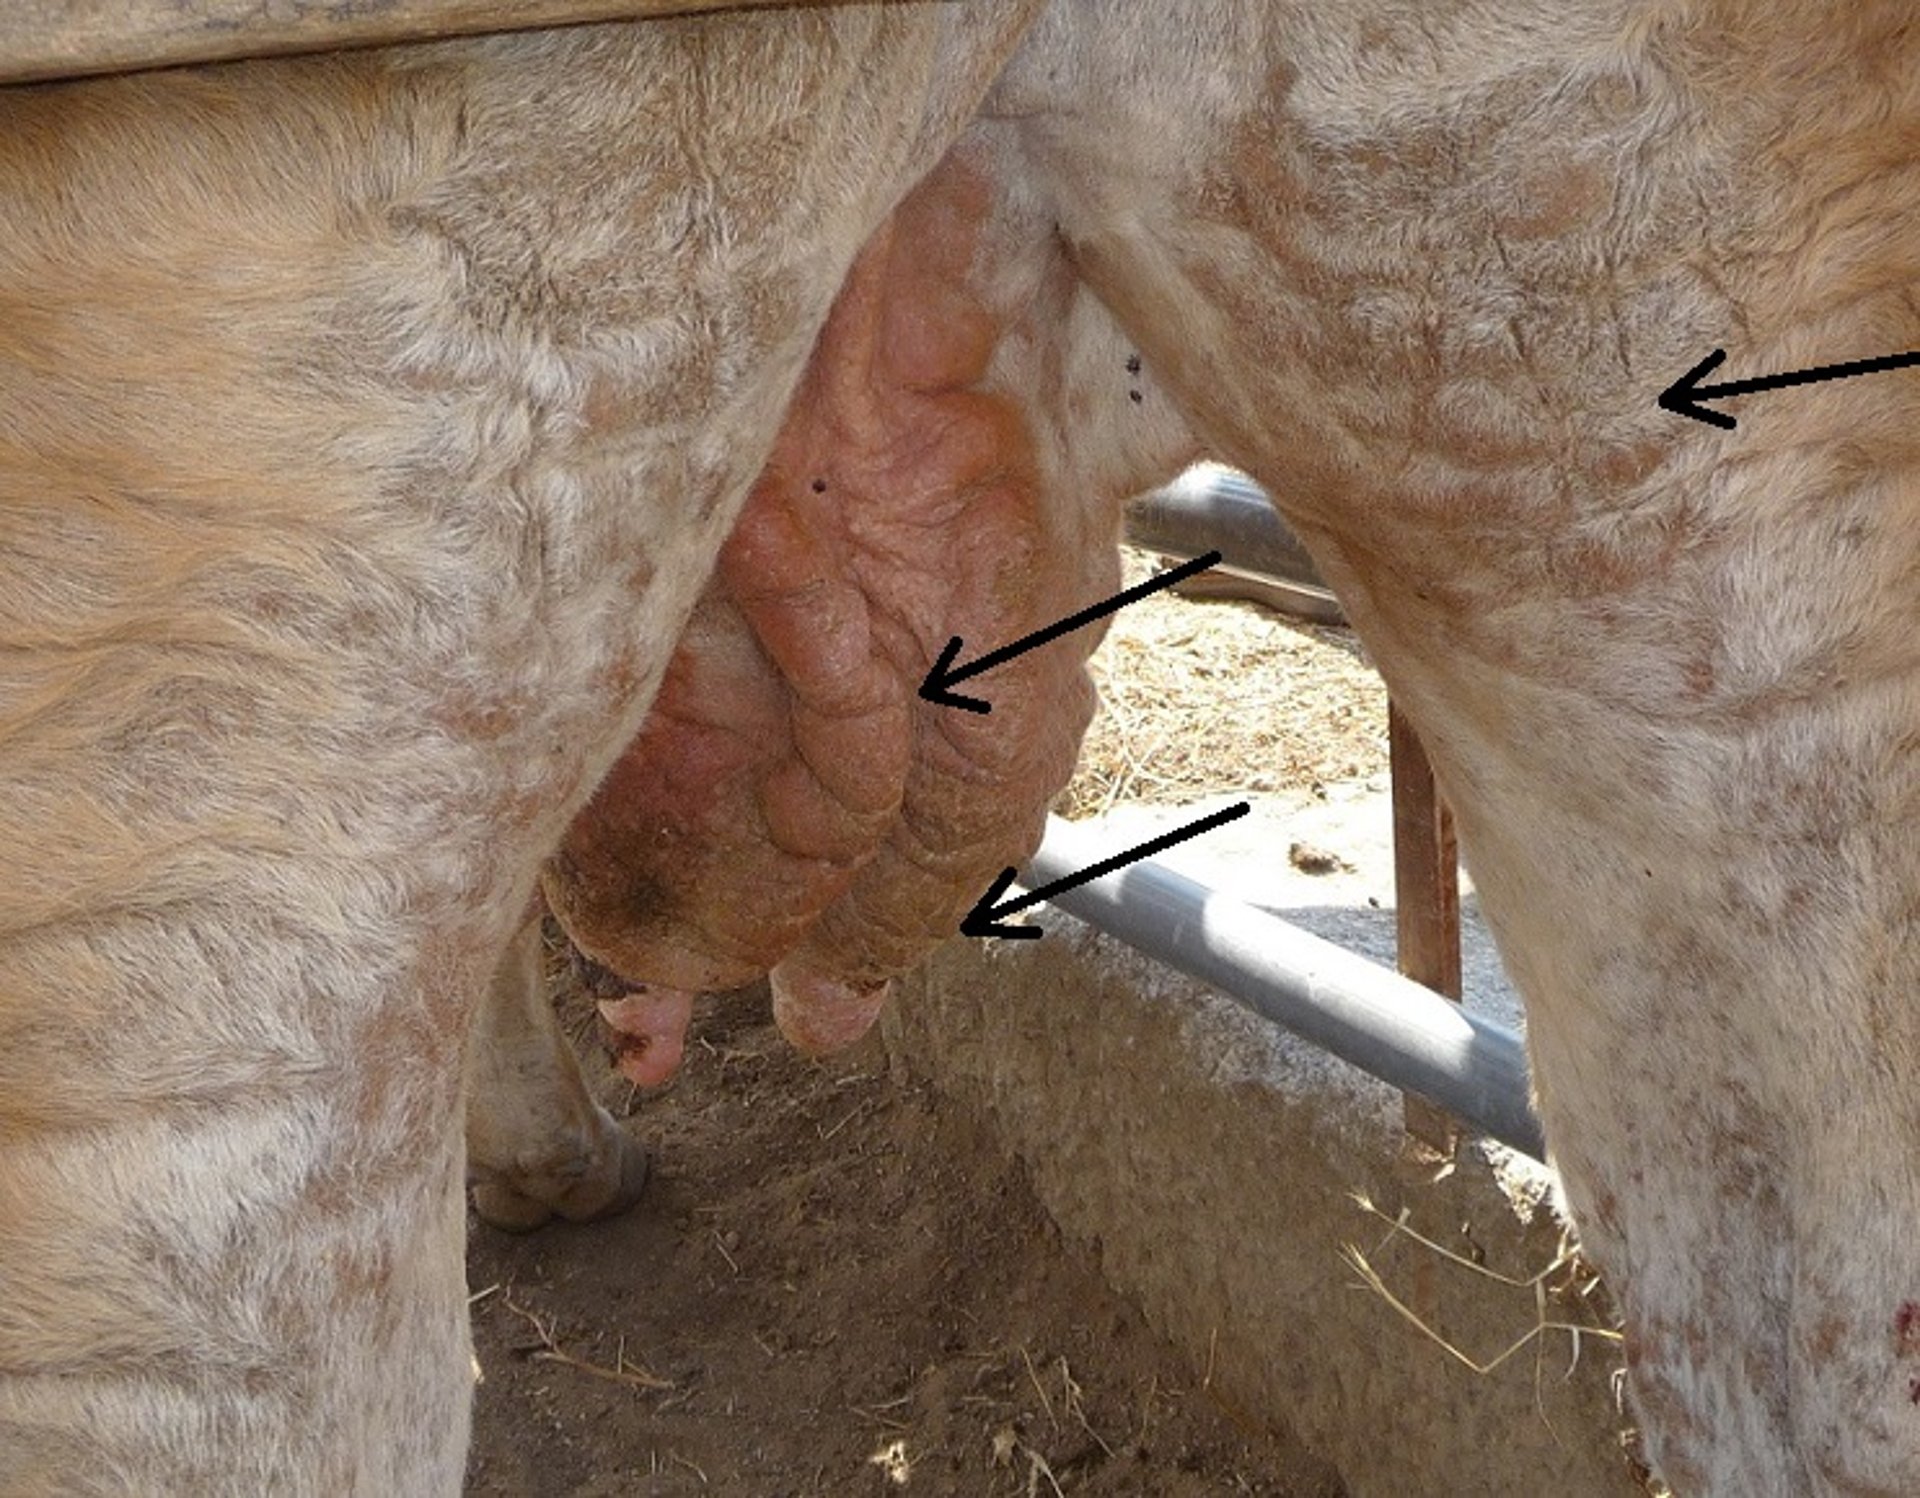 Hyperkeratosis and nodules in udder, cow